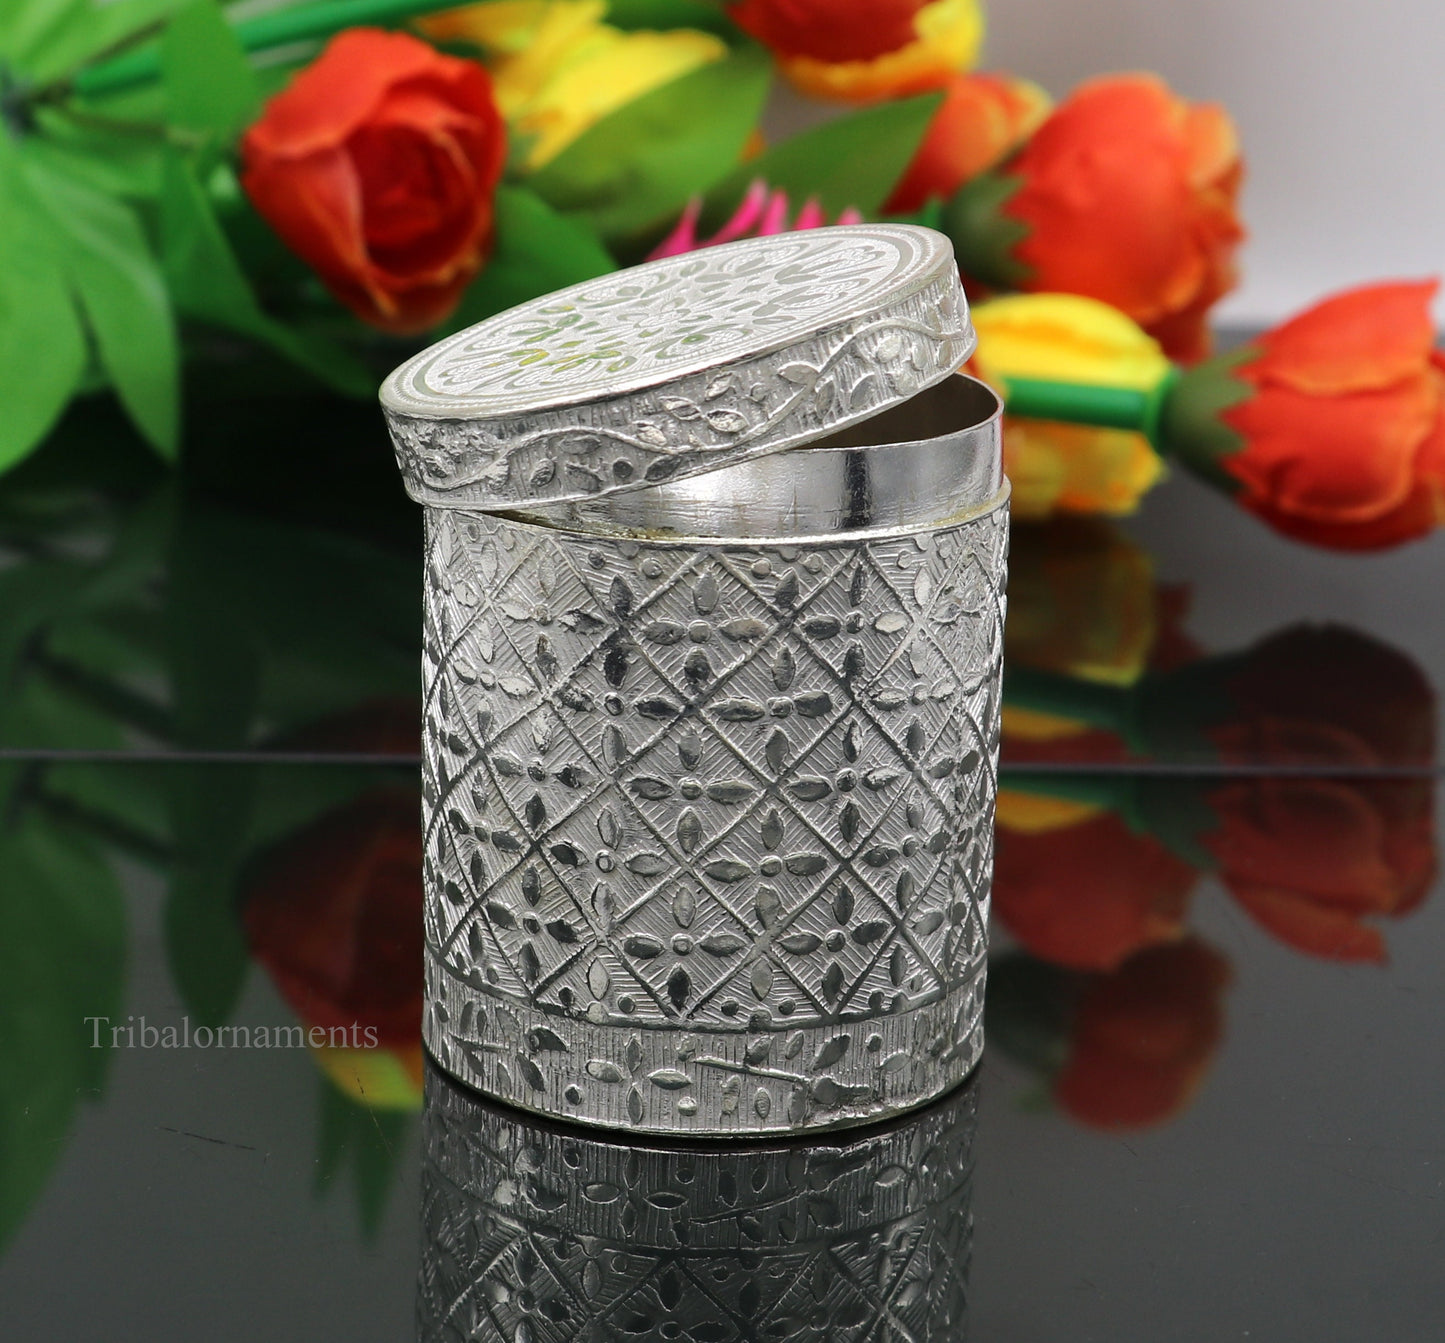 5.5 cm 925 solid silver utensils vintage style trinket box, container/casket box bridal floral work box, jewelry box silver utensils stb203 - TRIBAL ORNAMENTS